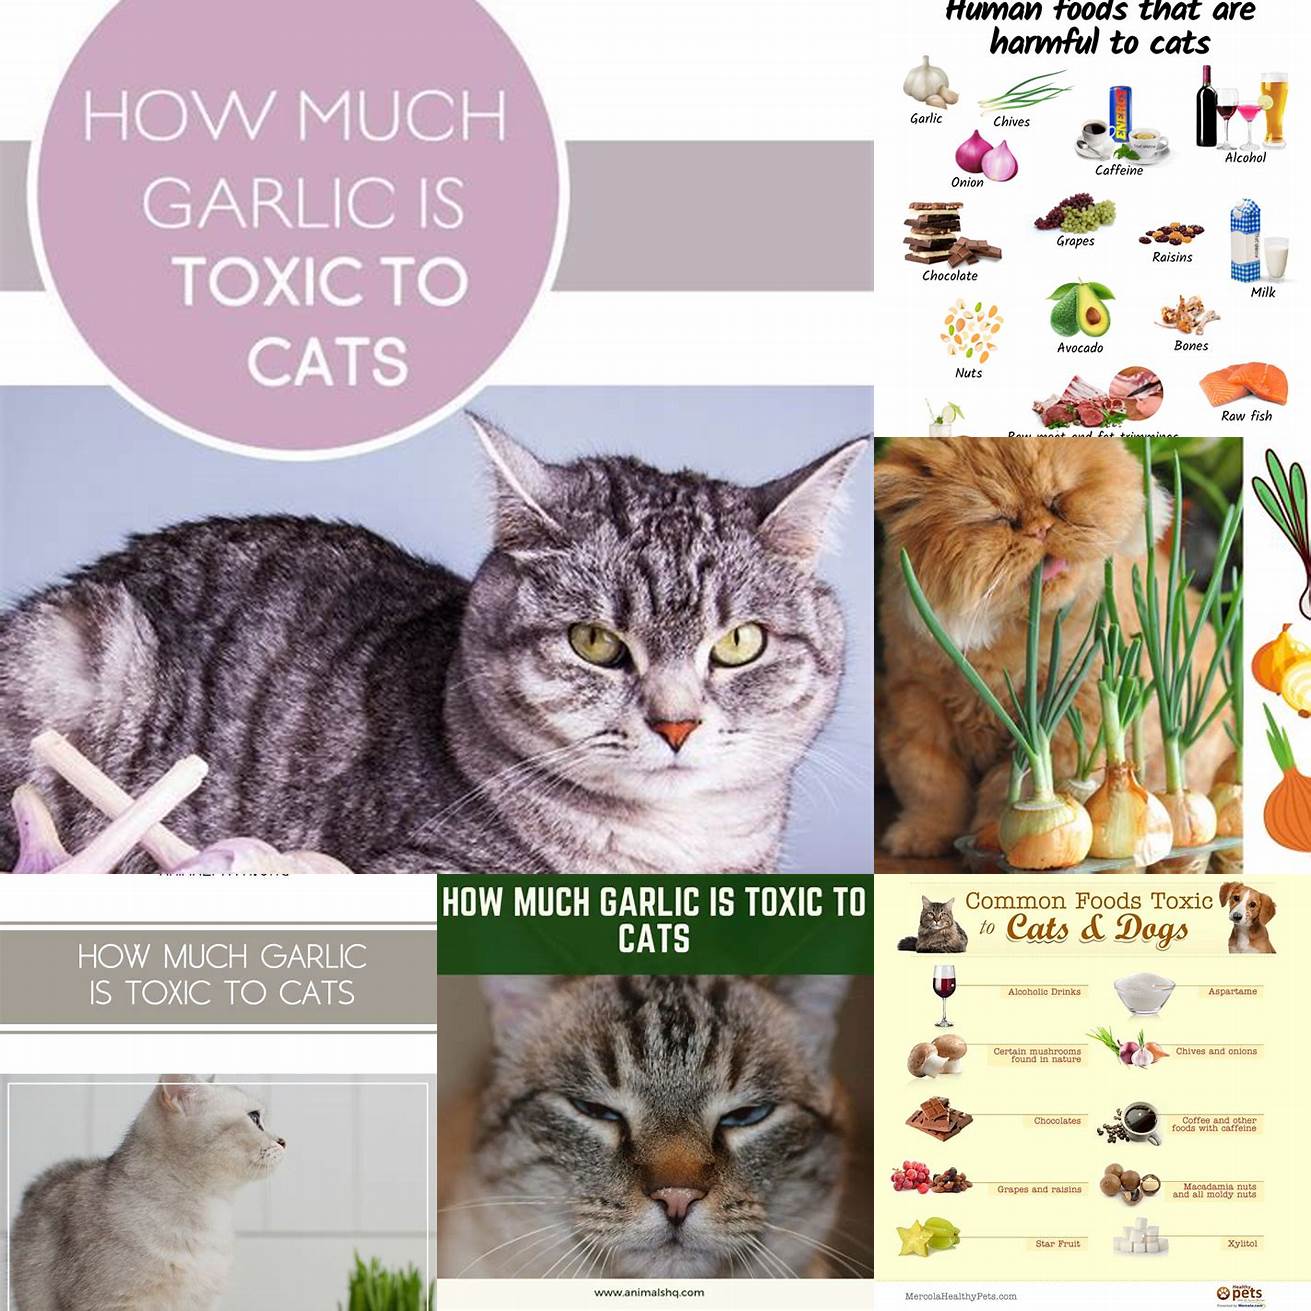 Avoid seasoning vegetables with ingredients that are toxic to cats like garlic or onion